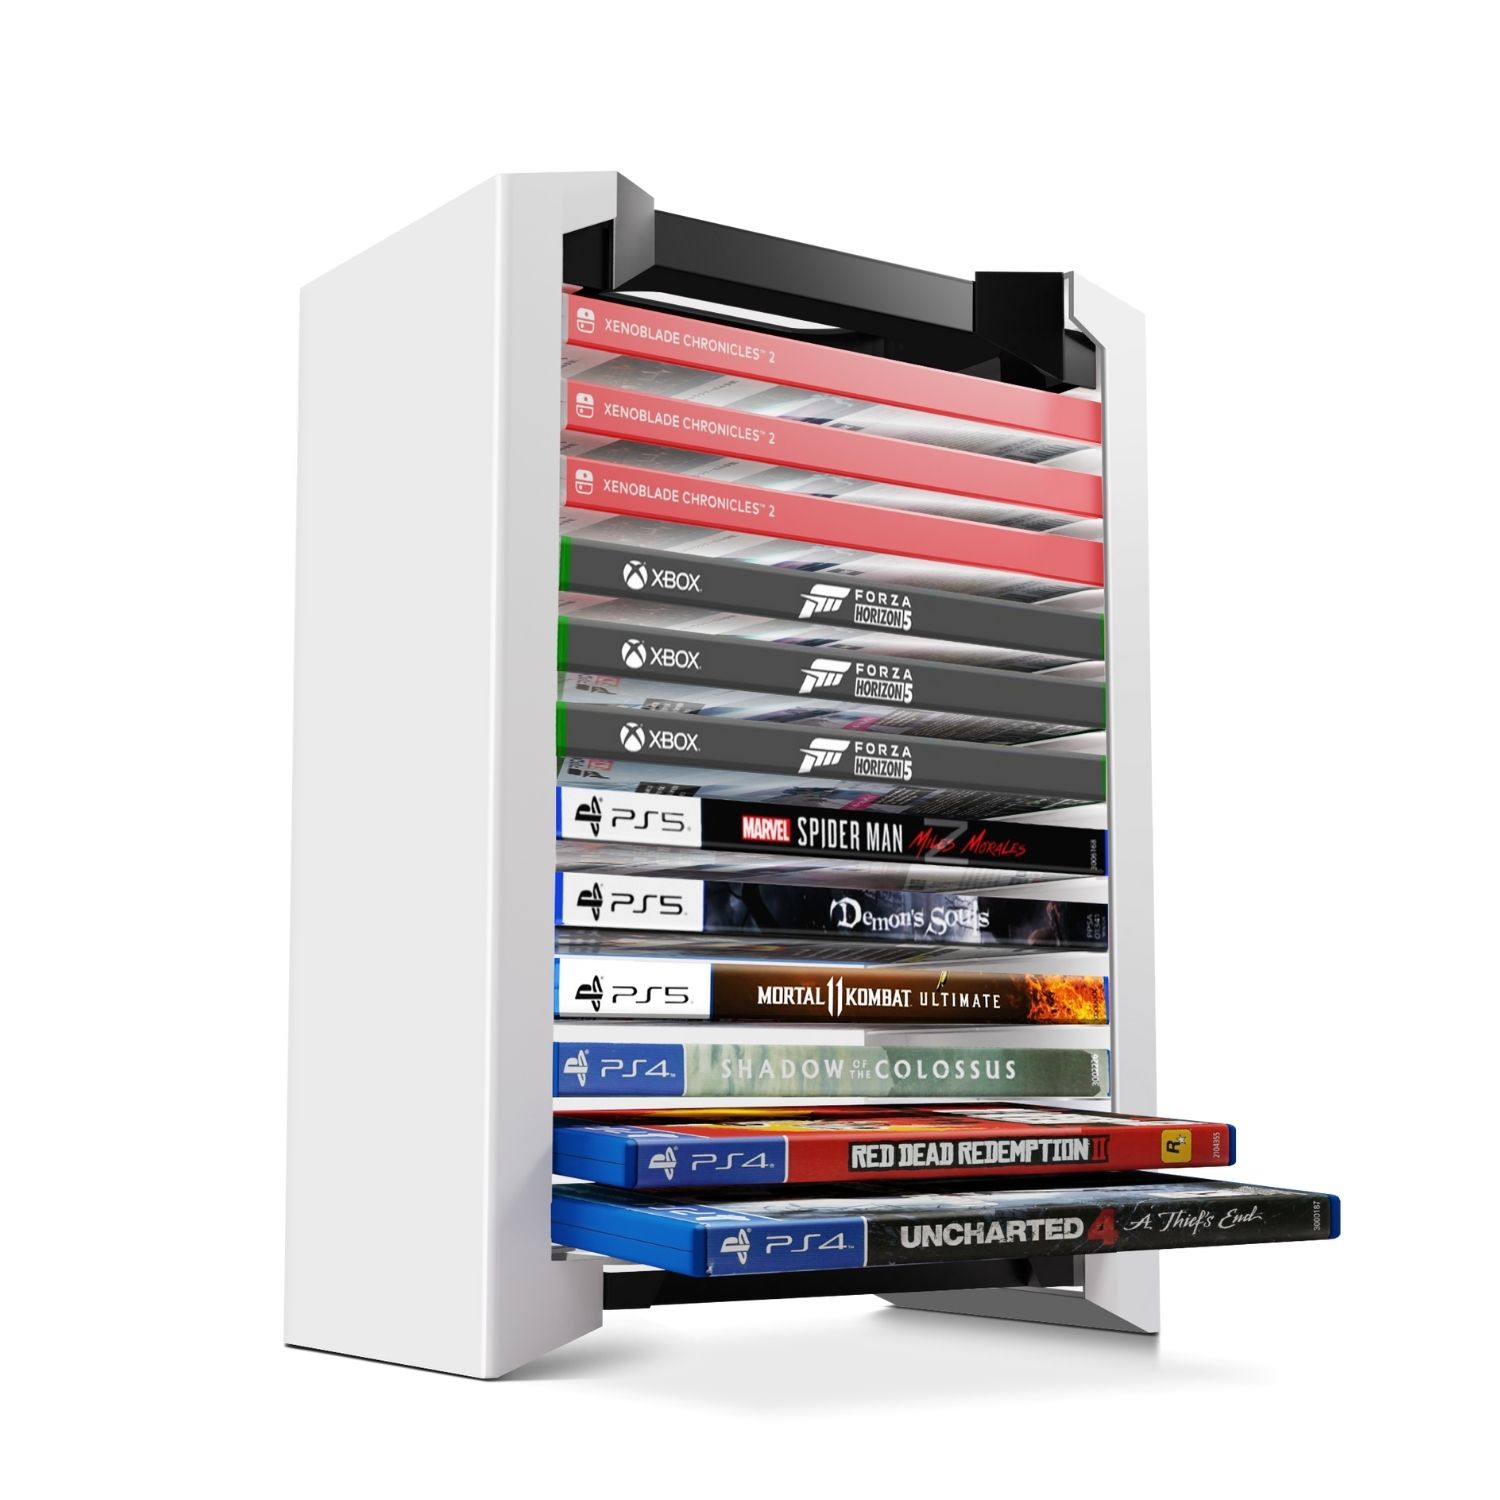 Video Game Storage Tower (12 CD Disc Blu-ray Case) Universal DVD Holder Shelf Rack Stand Vertical Organizer for PS5 Playstation 4 Nintendo Switch Xbox Movies